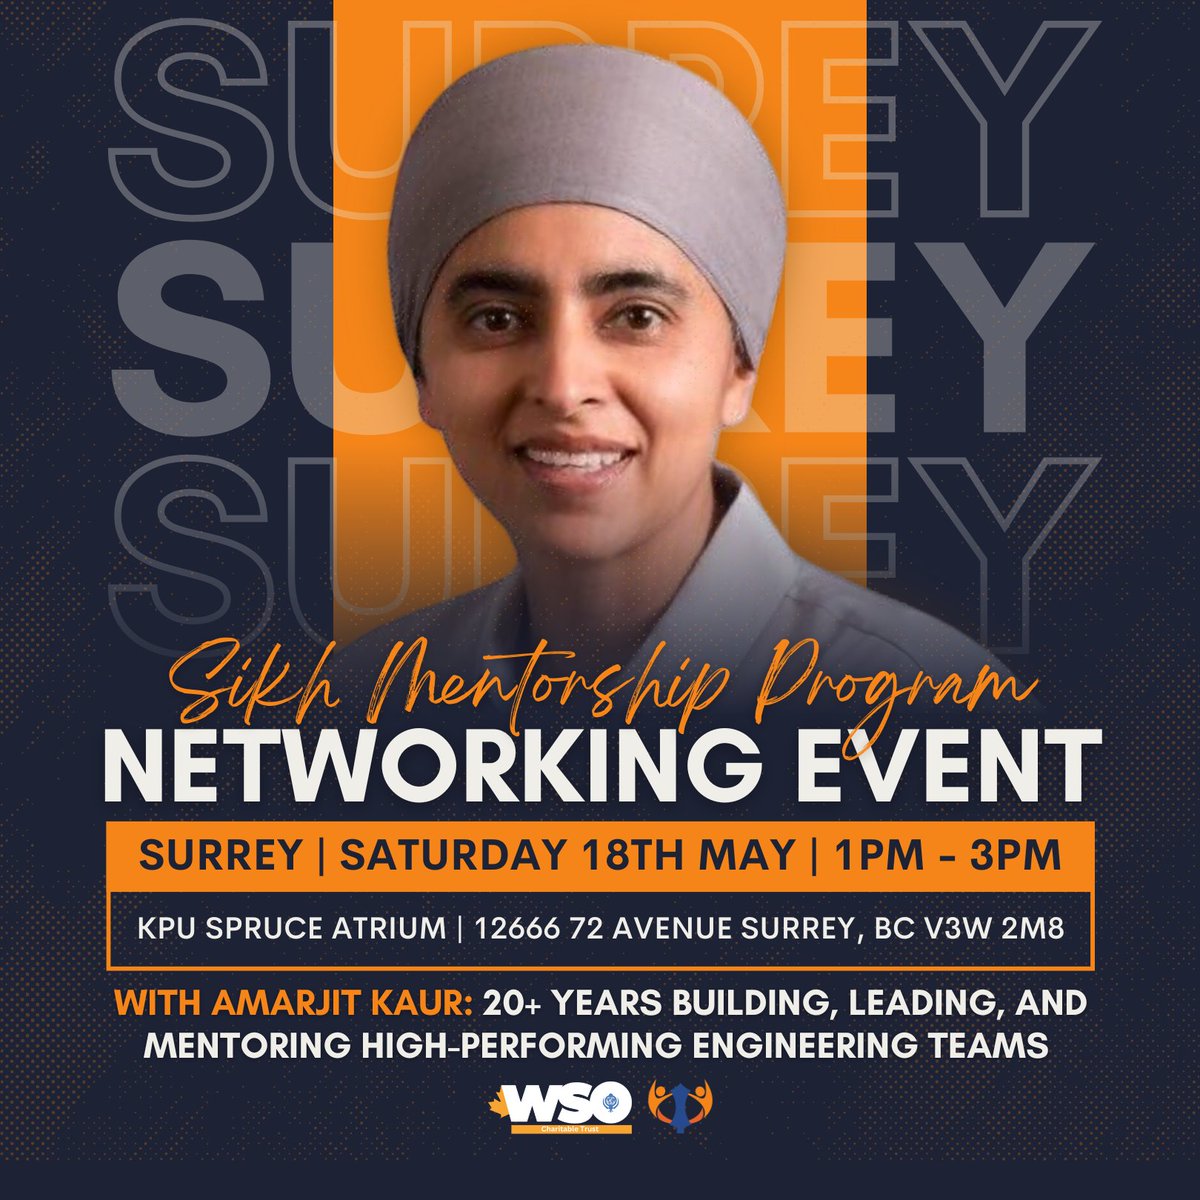 Surrey, join us at 1pm on Saturday May 18th for this exciting SMP networking event where you can connect with esteemed professionals from multiple industries, including our speaker Amarjit Kaur! Register now: events.humanitix.com/sikh-mentorshi… #InternationalStudents #NetworkingEvents